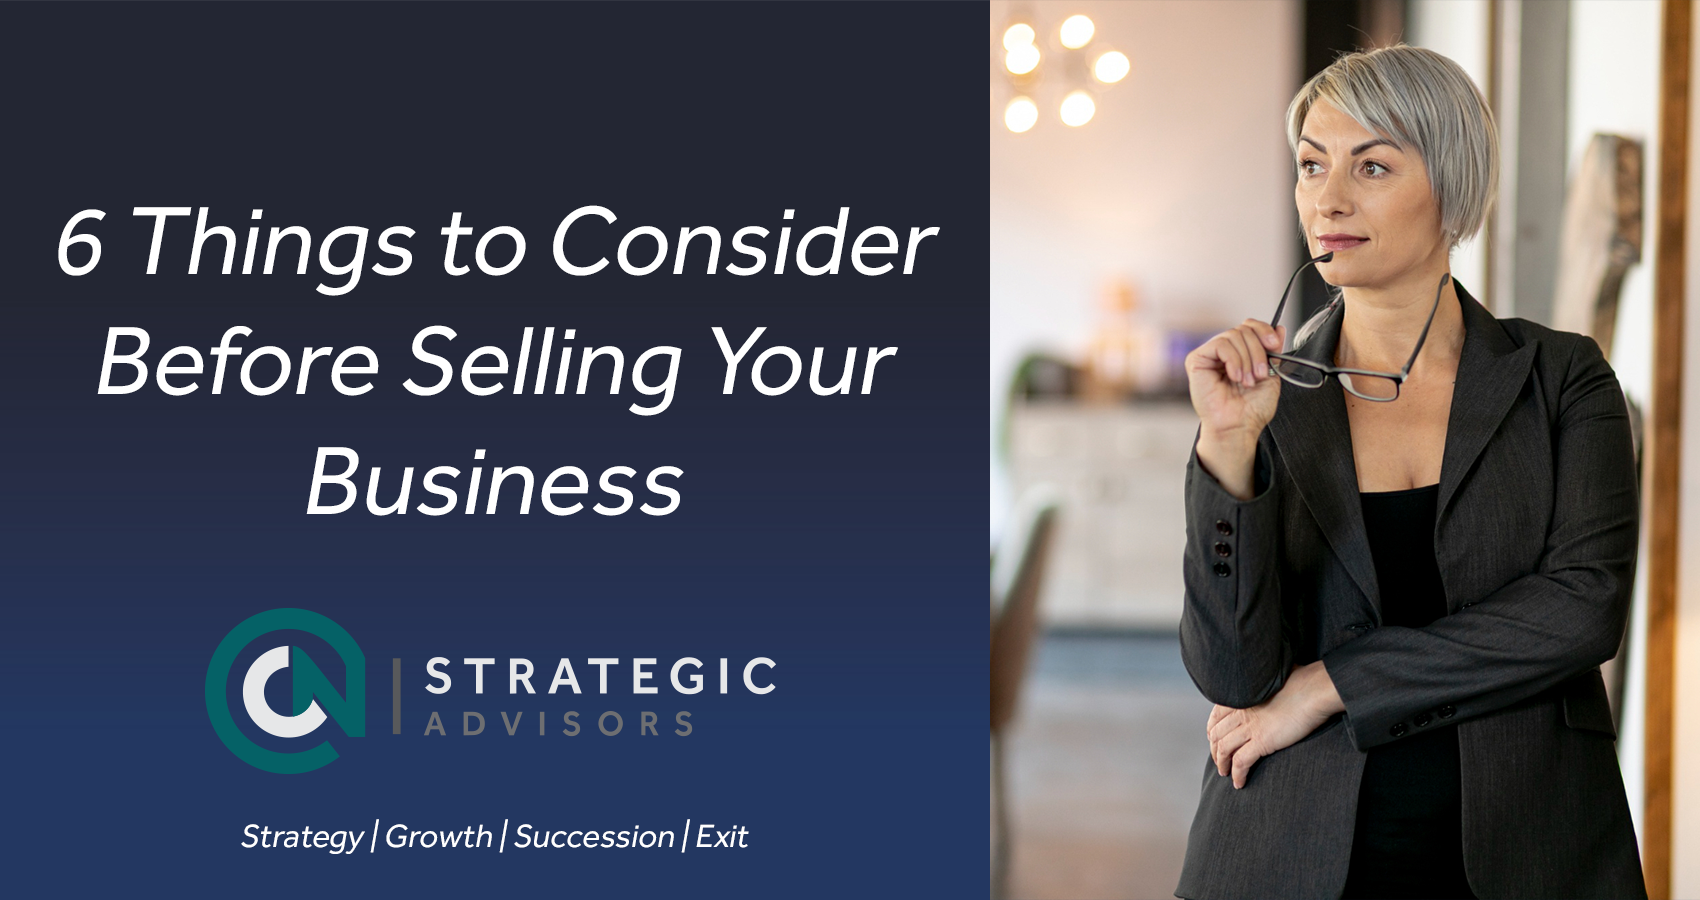 CNSA Blog Thumbnail - 6 things to consider before selling your business